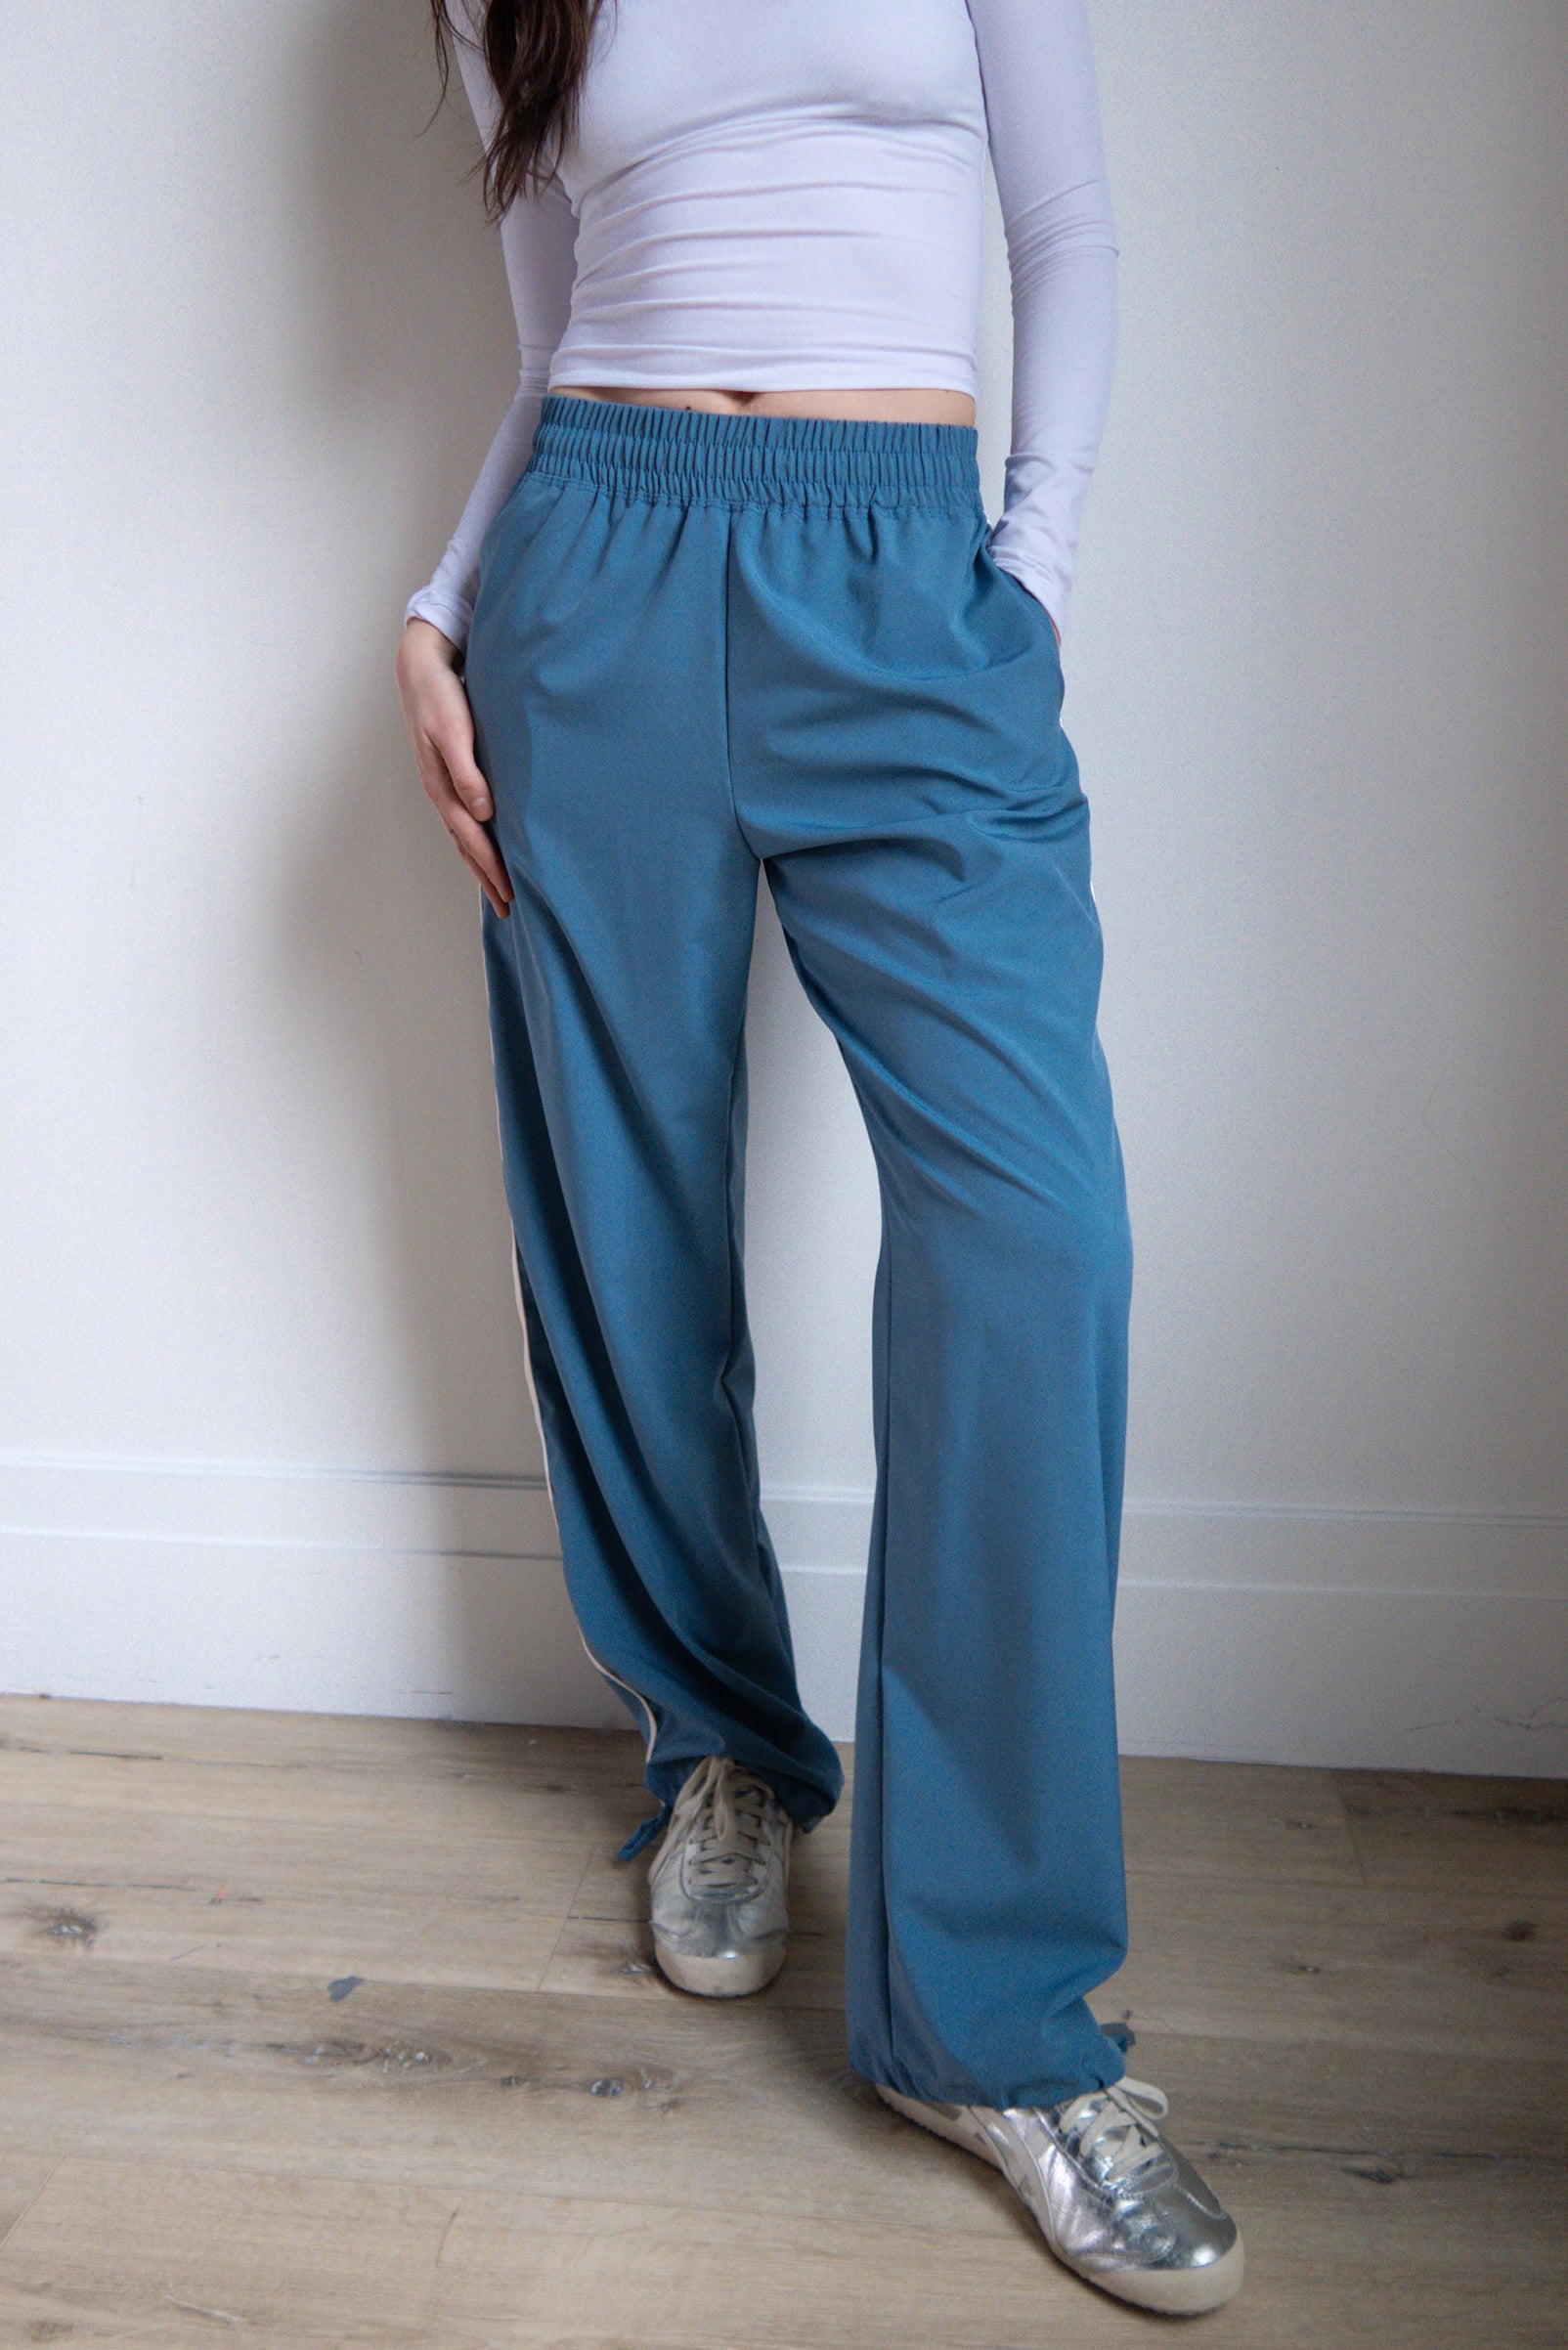 Dance Trousers Track Lounge - Buy Dance Trousers Track Lounge